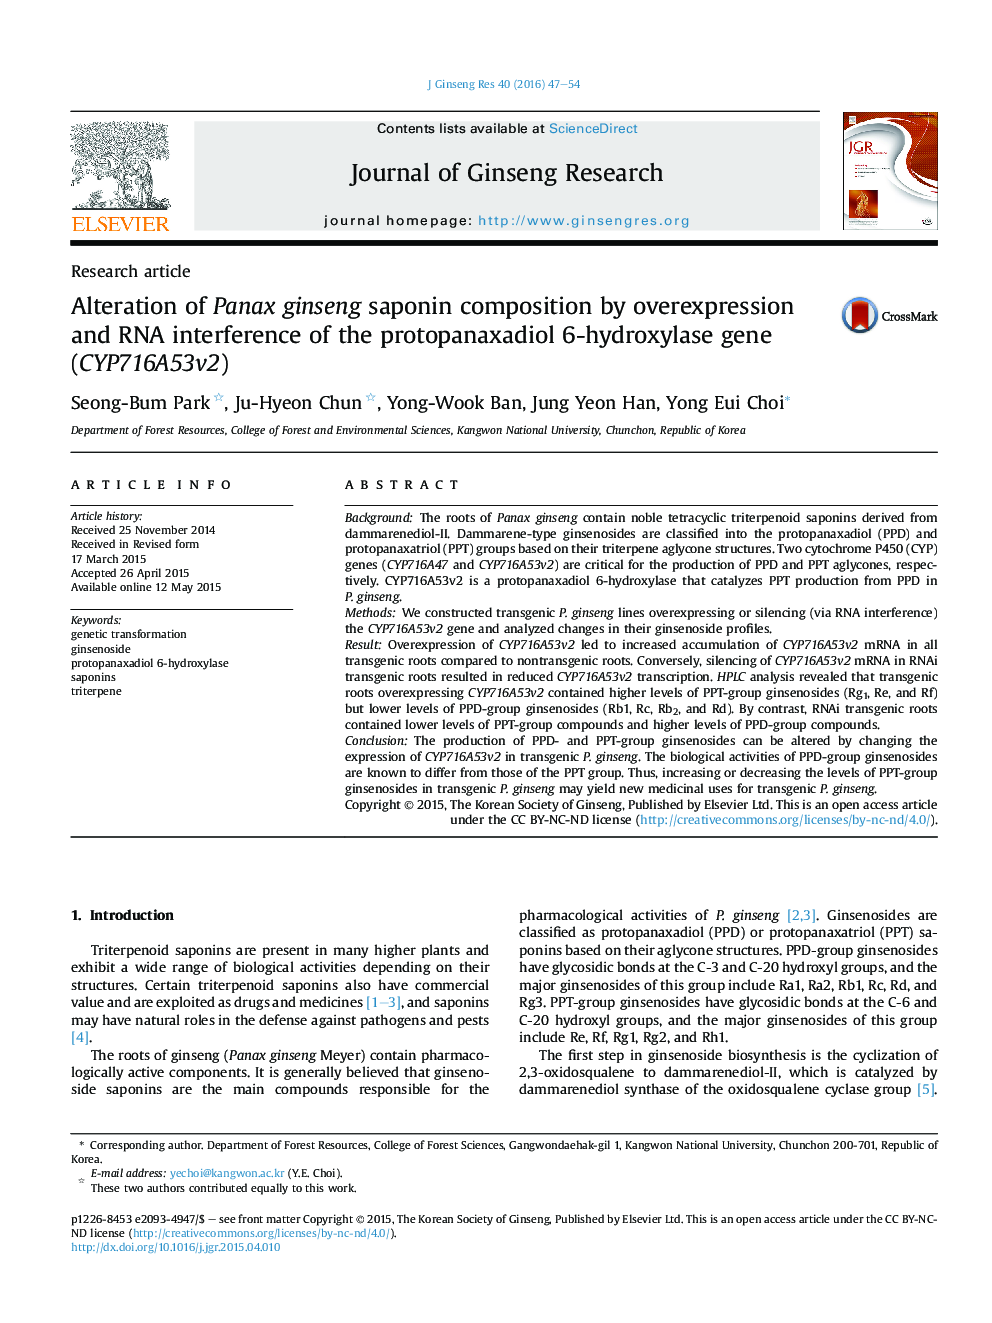 Alteration of Panax ginseng saponin composition by overexpression and RNA interference of the protopanaxadiol 6-hydroxylase gene (CYP716A53v2) 